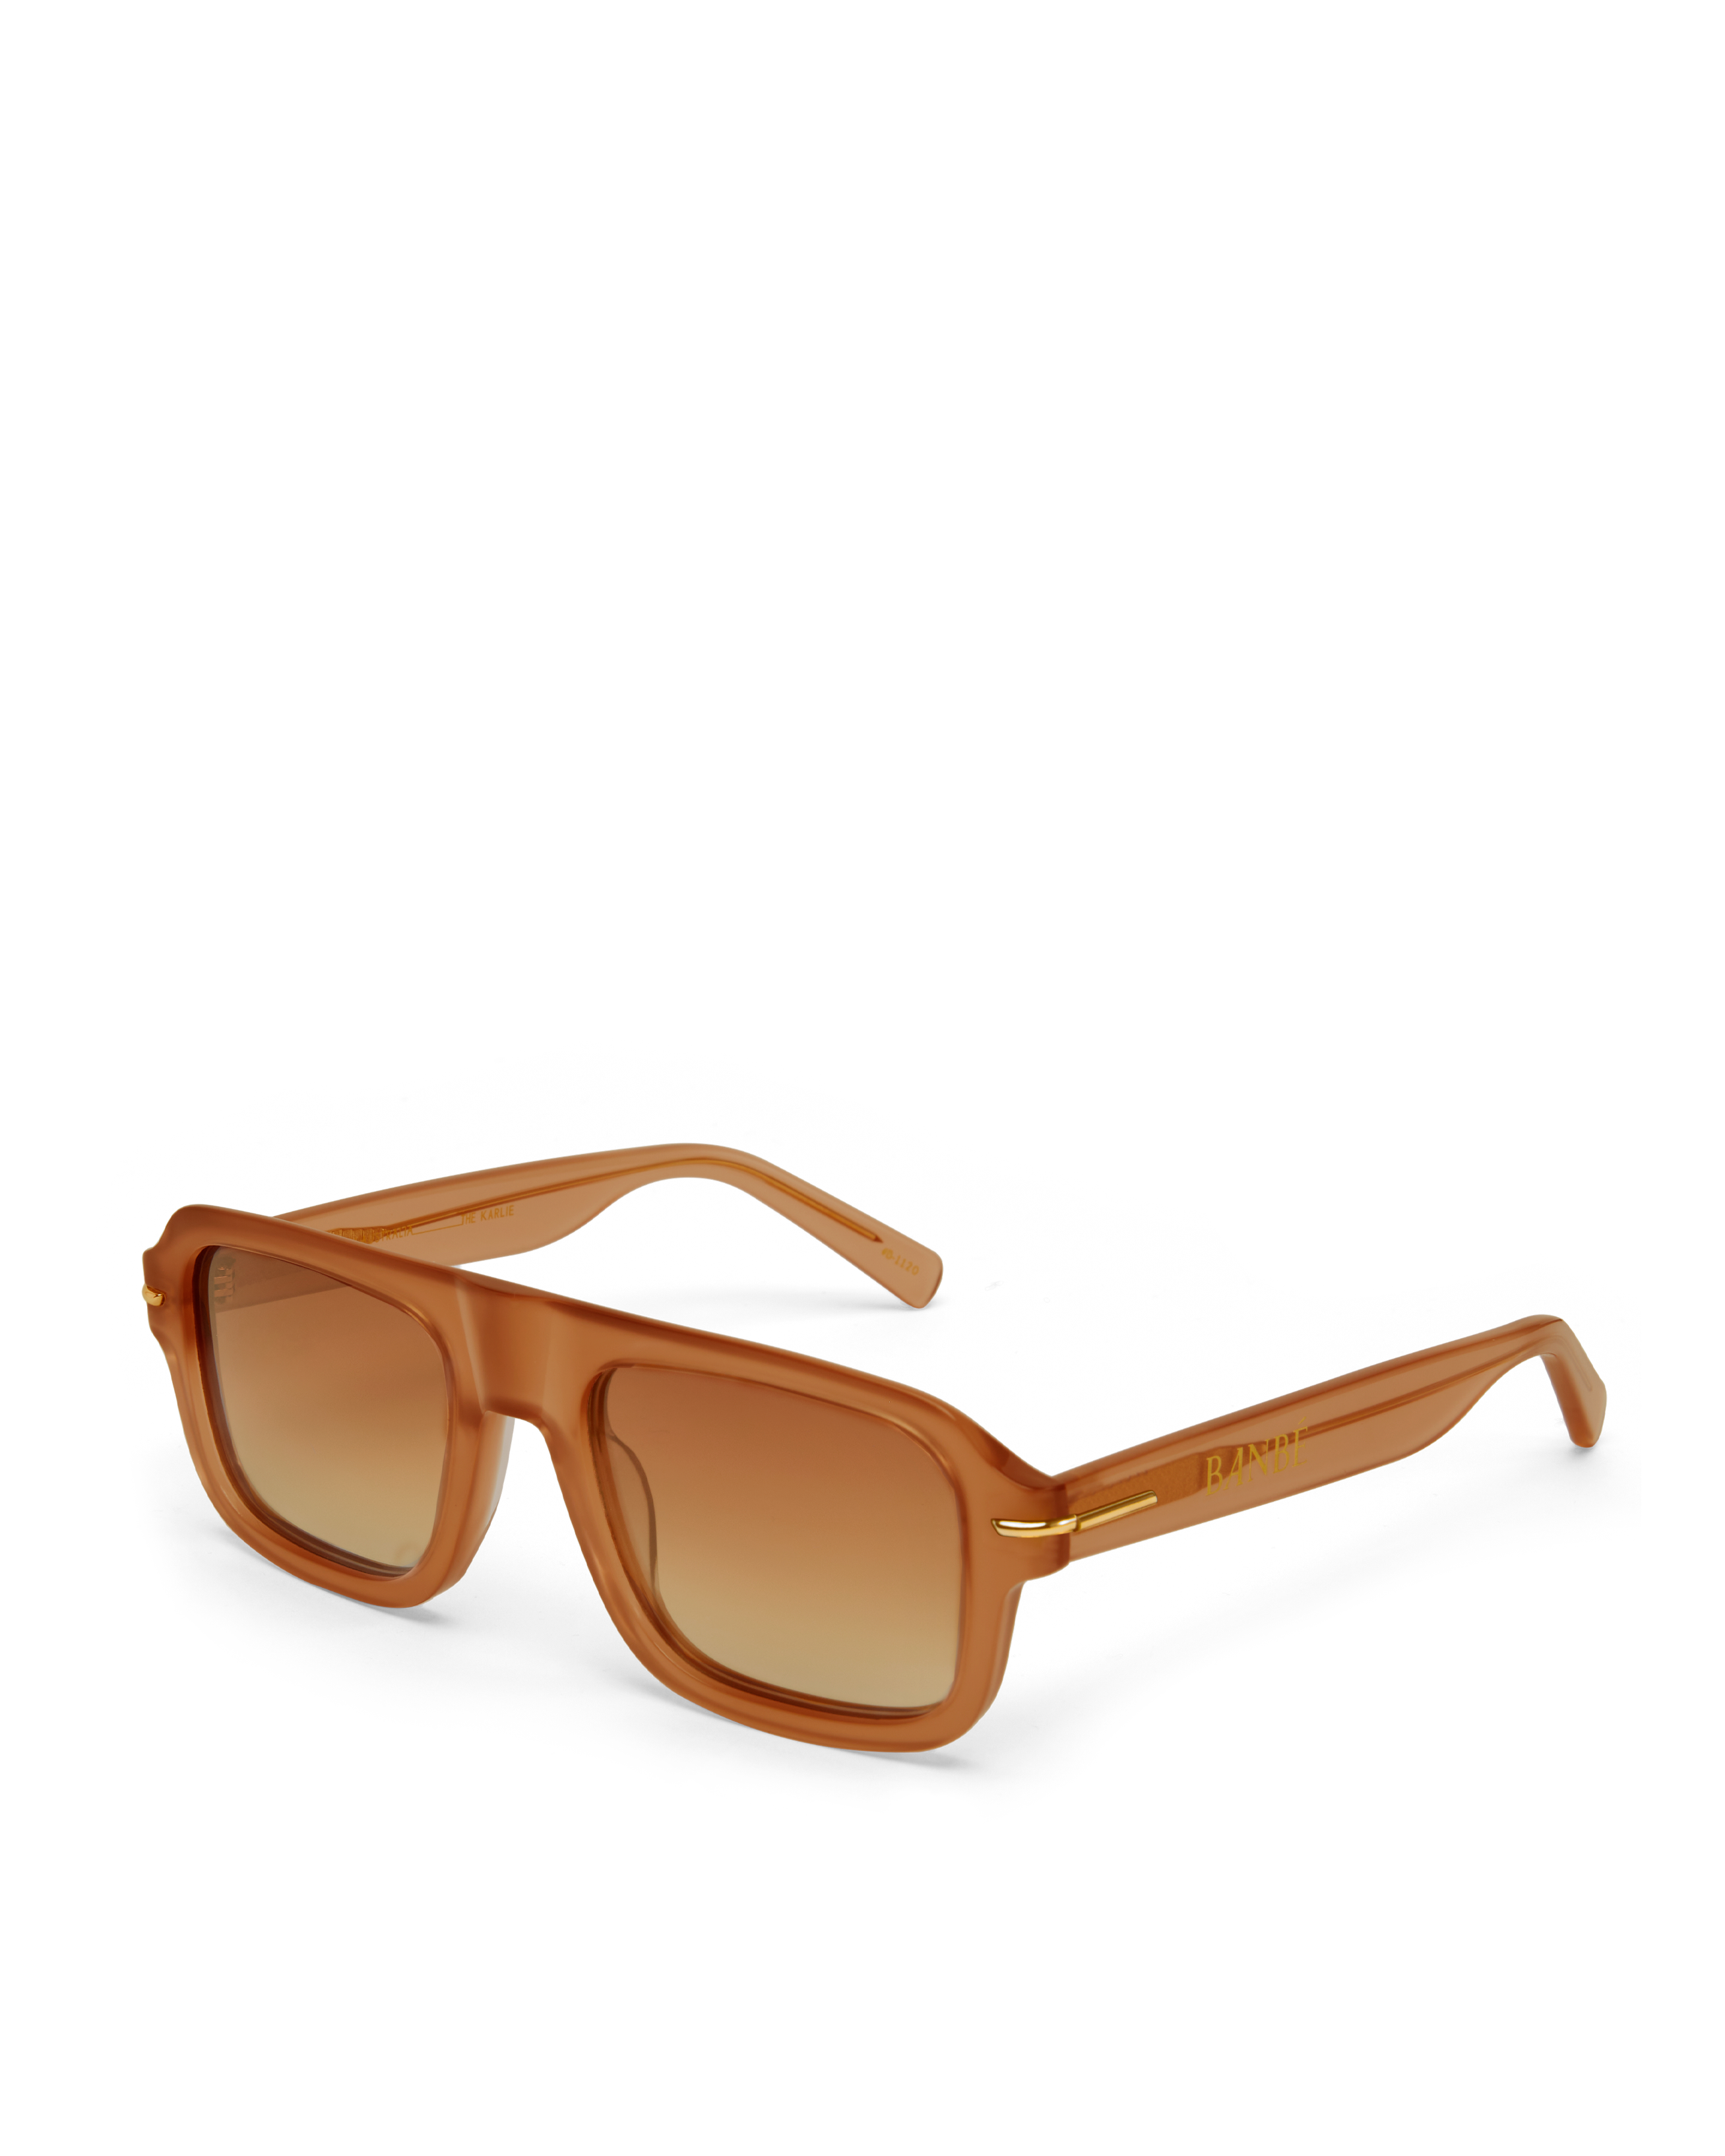 THE KARLIE - TERRACOTTA-AMBER FADE